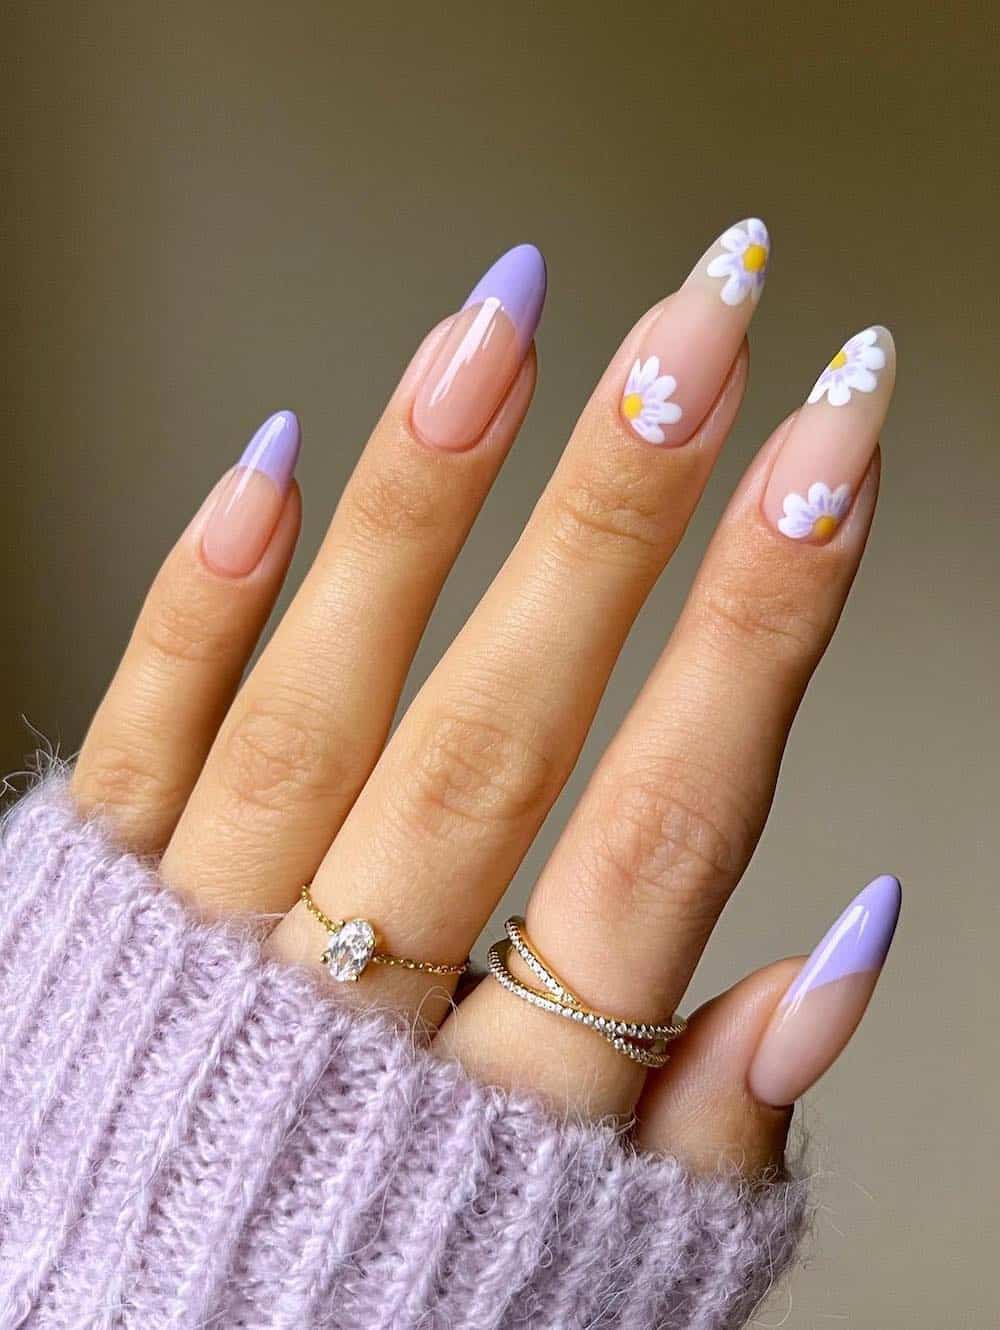 A hand with long nude almond nails with lilac French tips and two accent nails featuring white and purple floral art